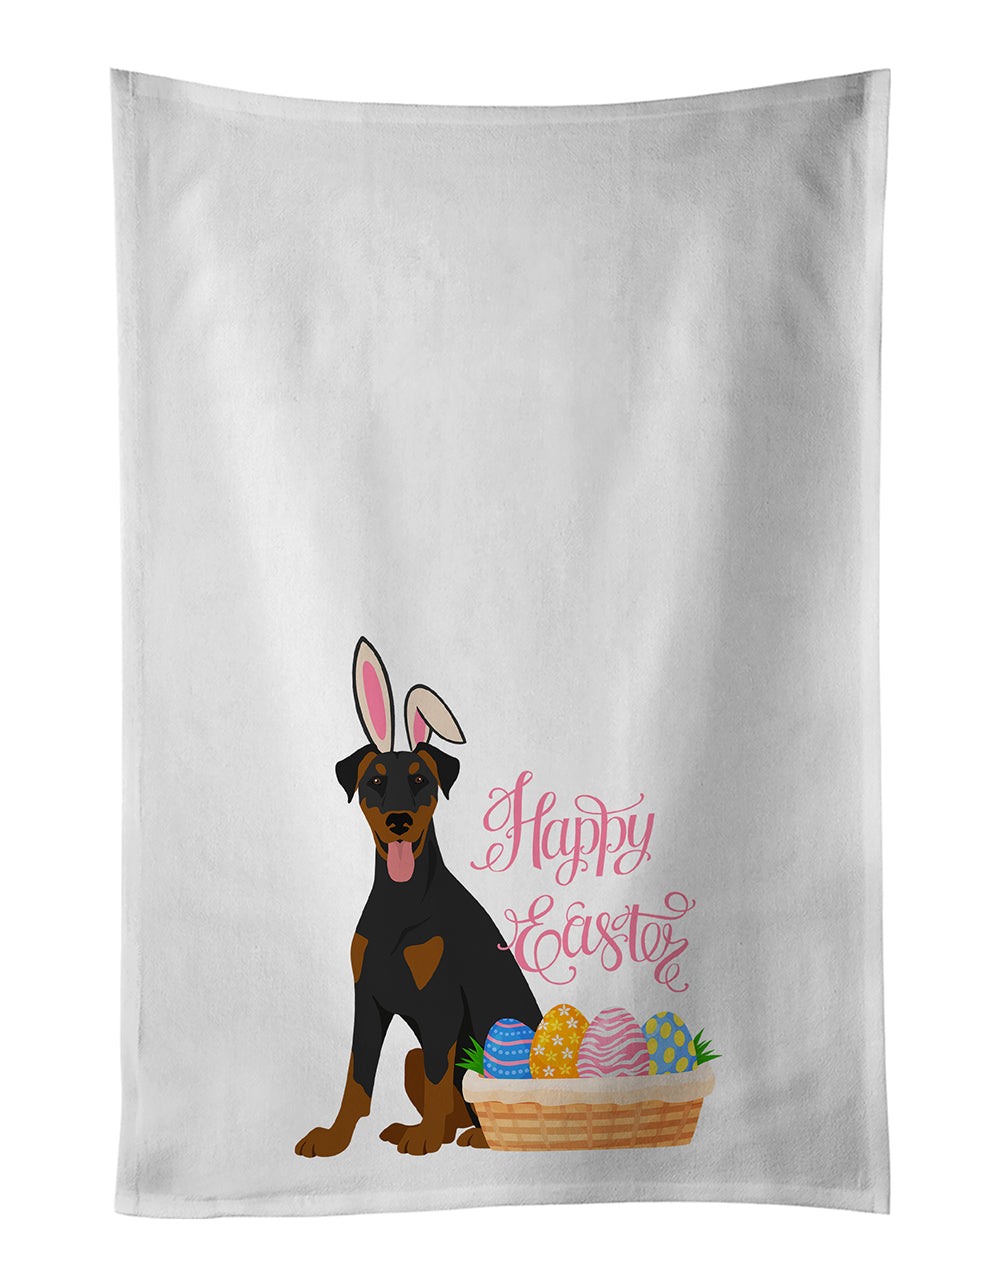 Buy this Natural Ear Black and Tan Doberman Pinscher Easter White Kitchen Towel Set of 2 Dish Towels